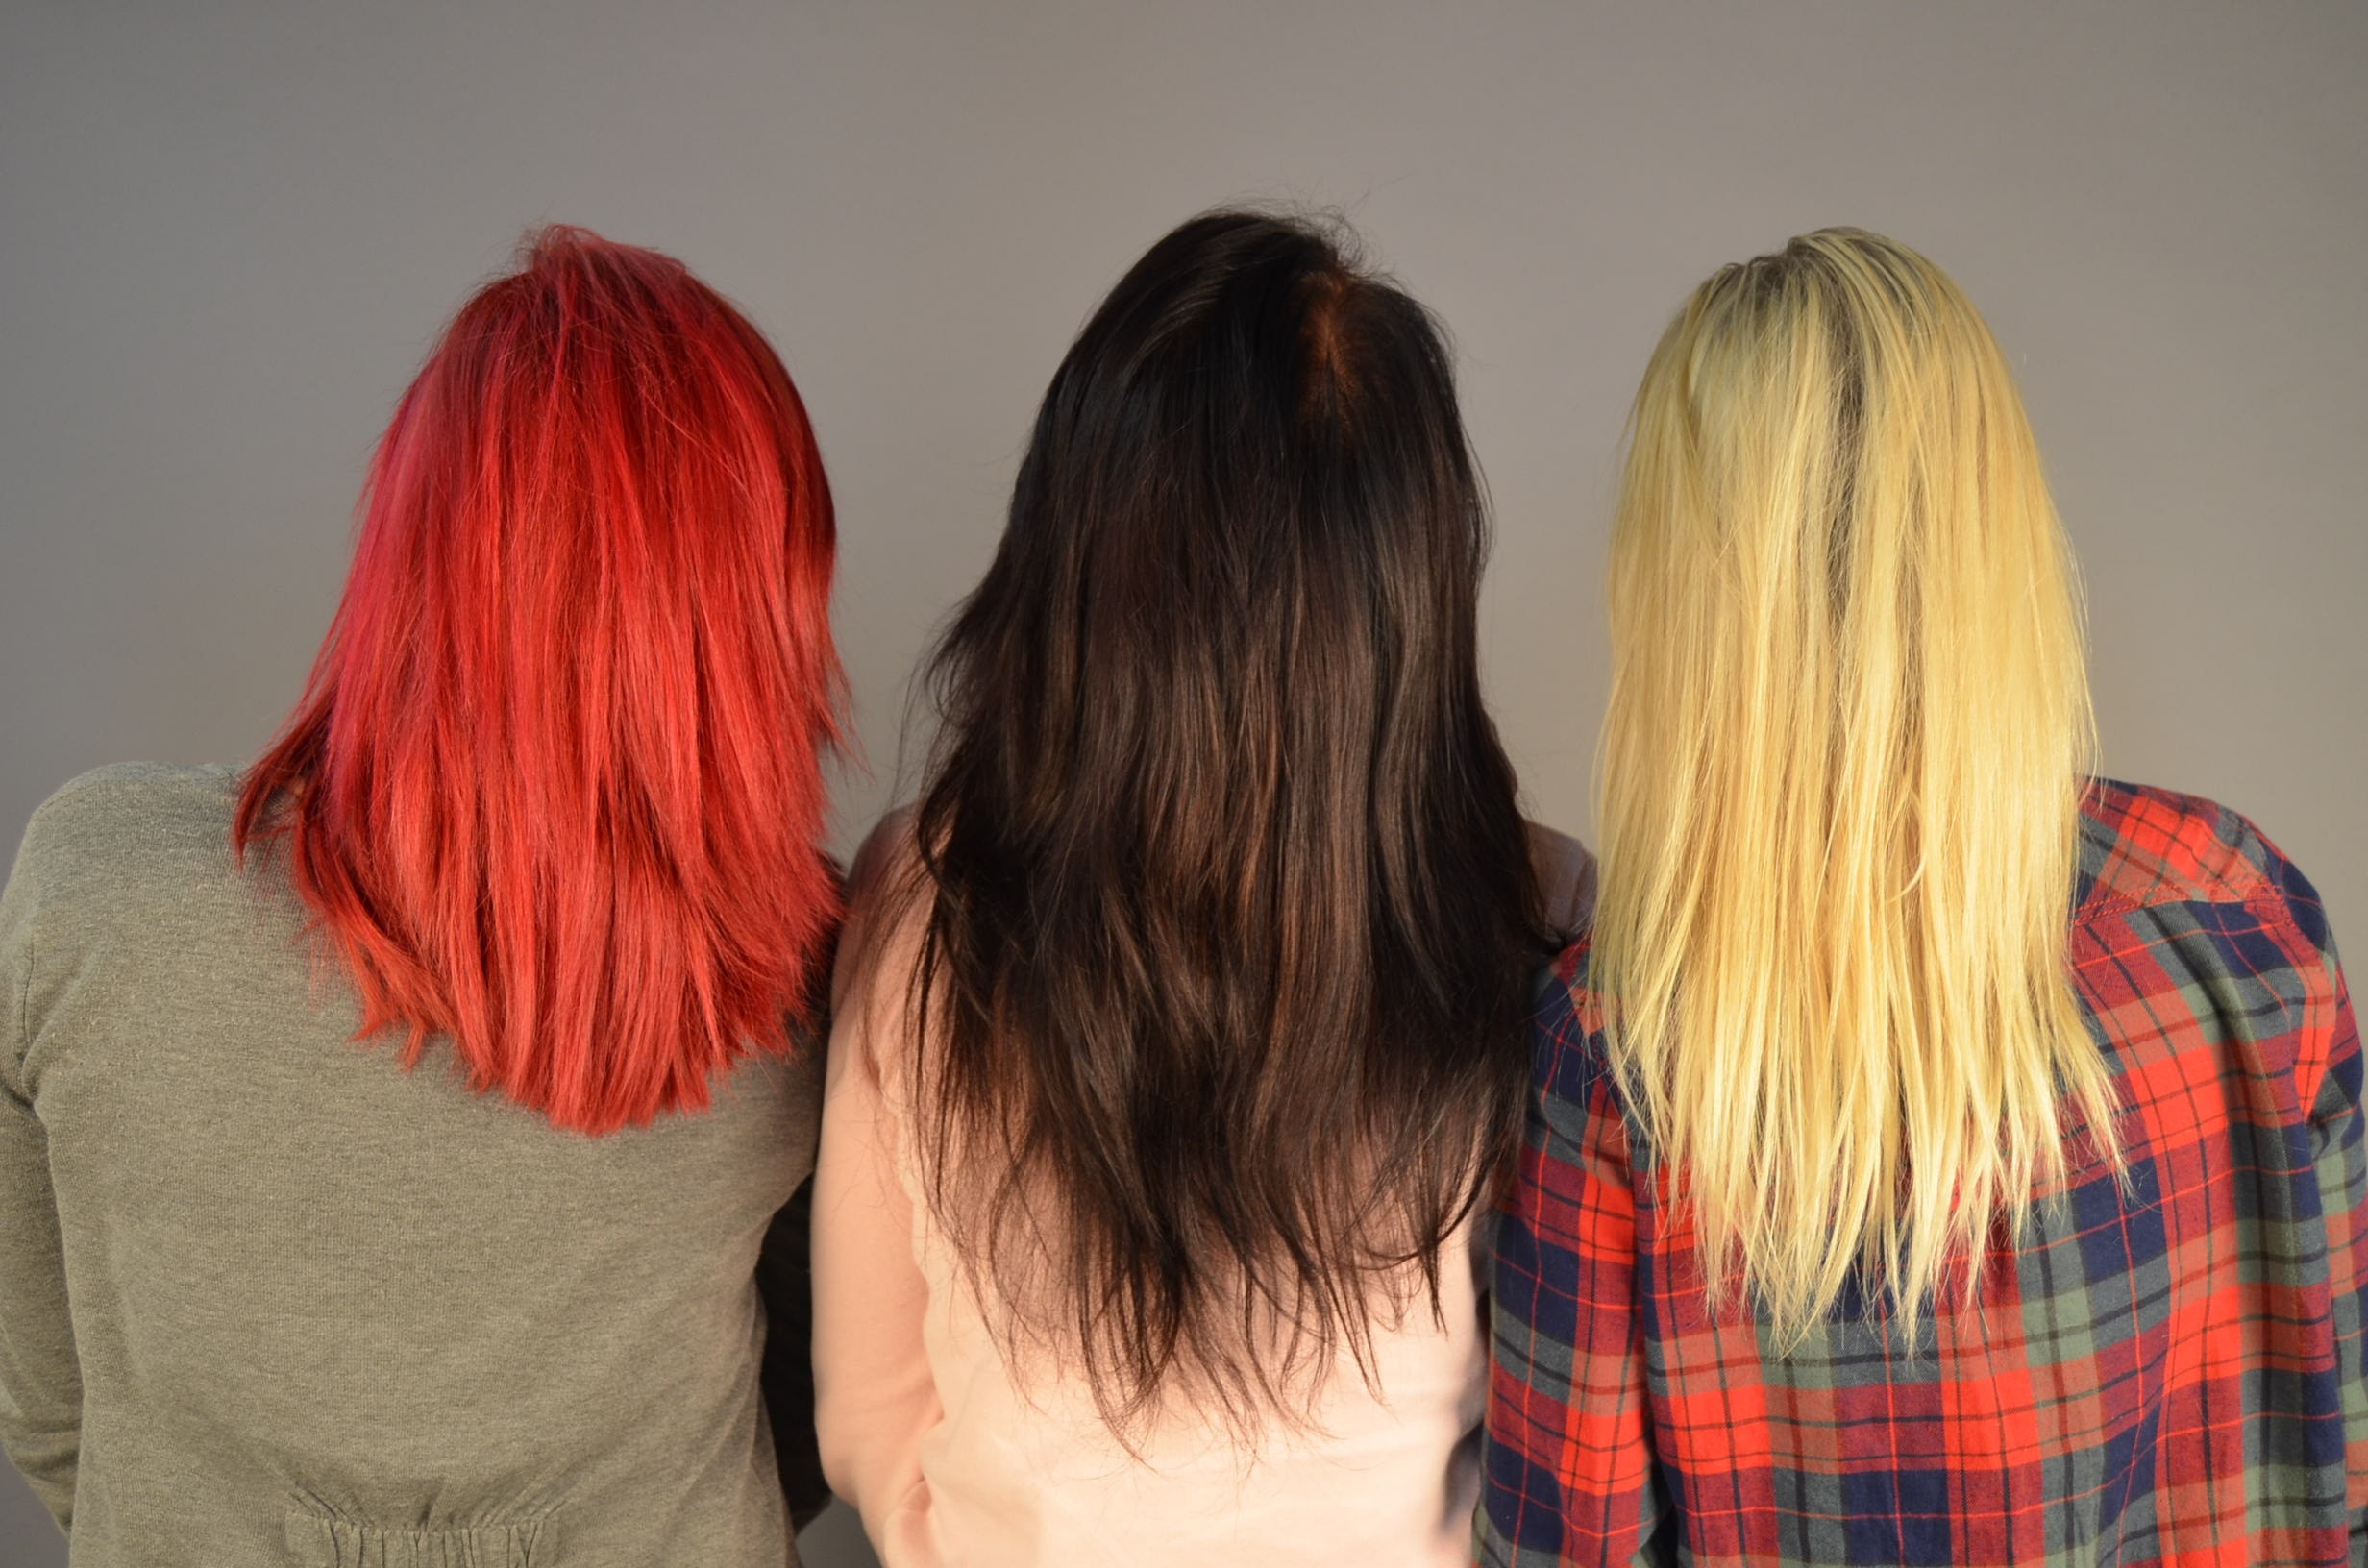 3 women's colored hair